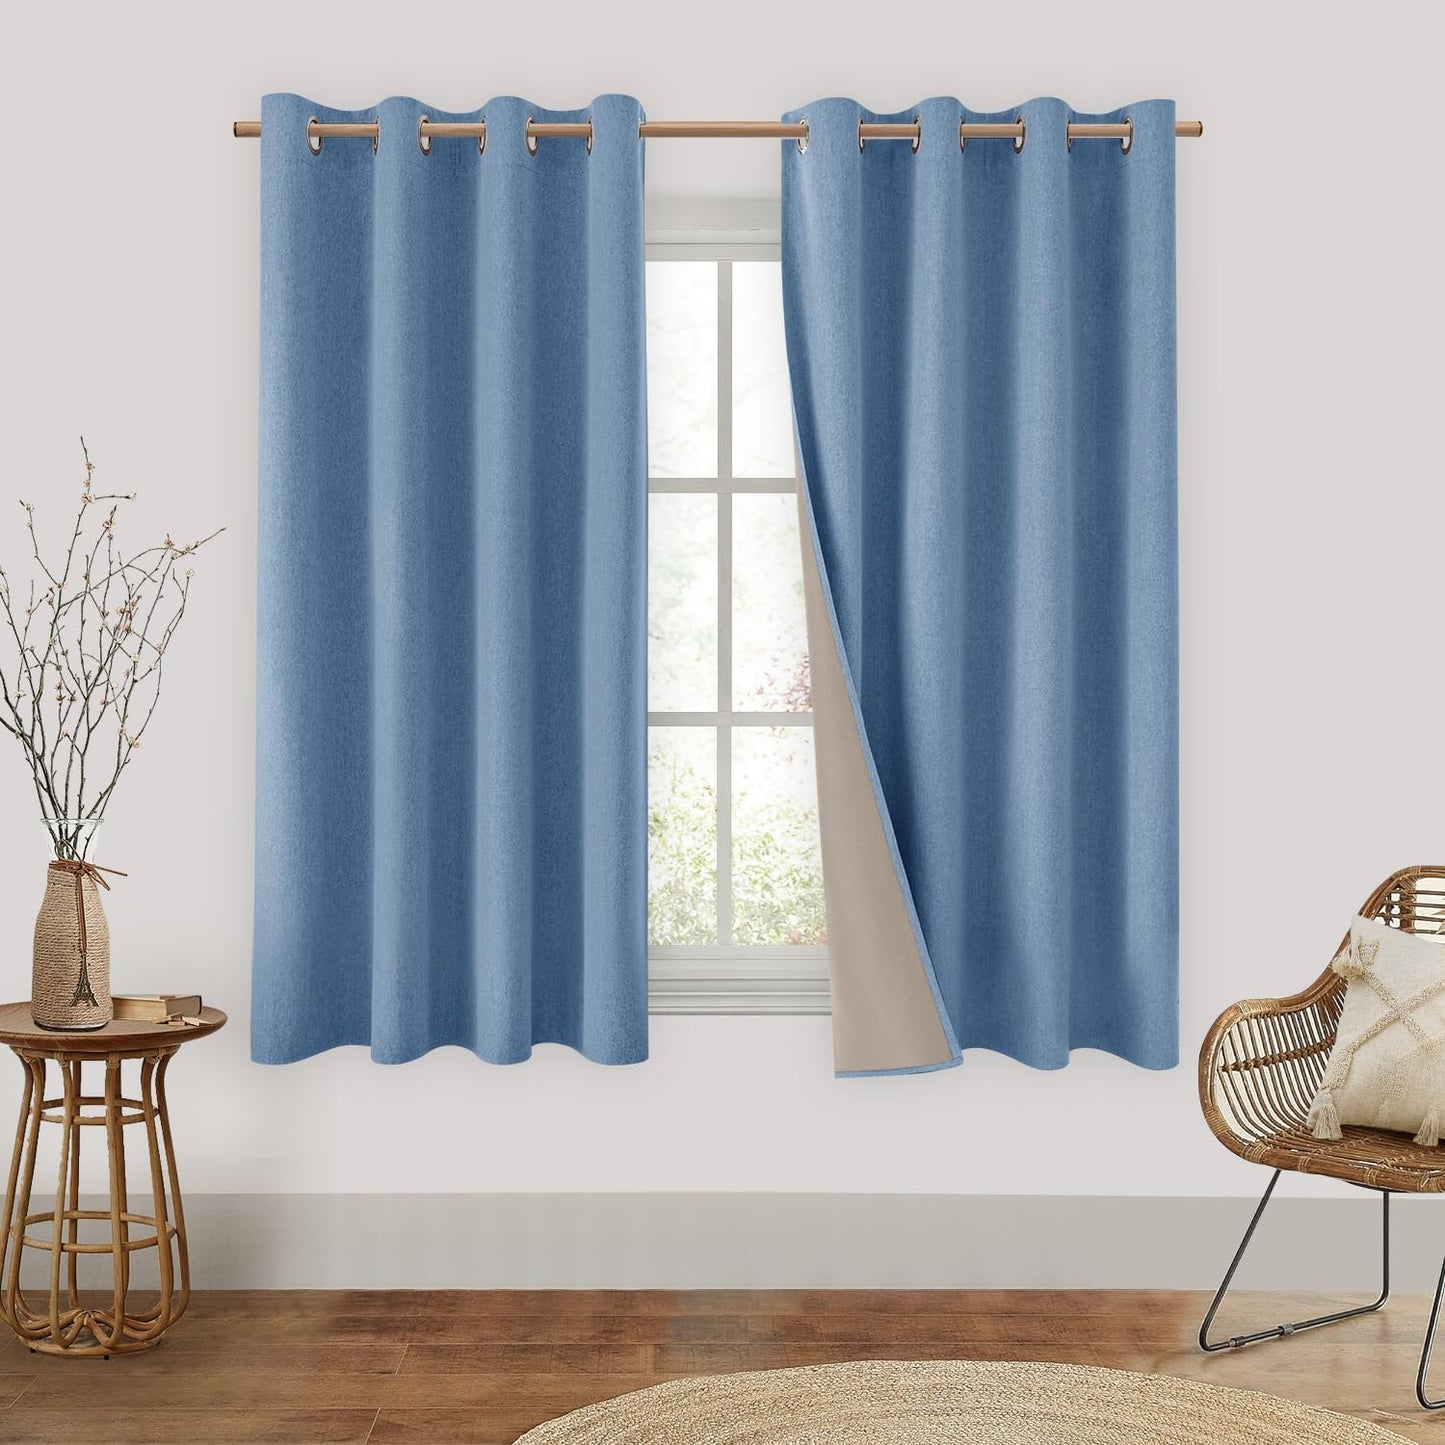 HOMEIDEAS 100% Blackout Linen Curtains for Bedroom 84 Inches Long 2 Panels Blush Pink Curtains Full Black Out Thermal Insulated Grommet Window Curtains/Drapes with Liner for Nursery  HOMEIDEAS Stone Blue 52"W X 63"L 